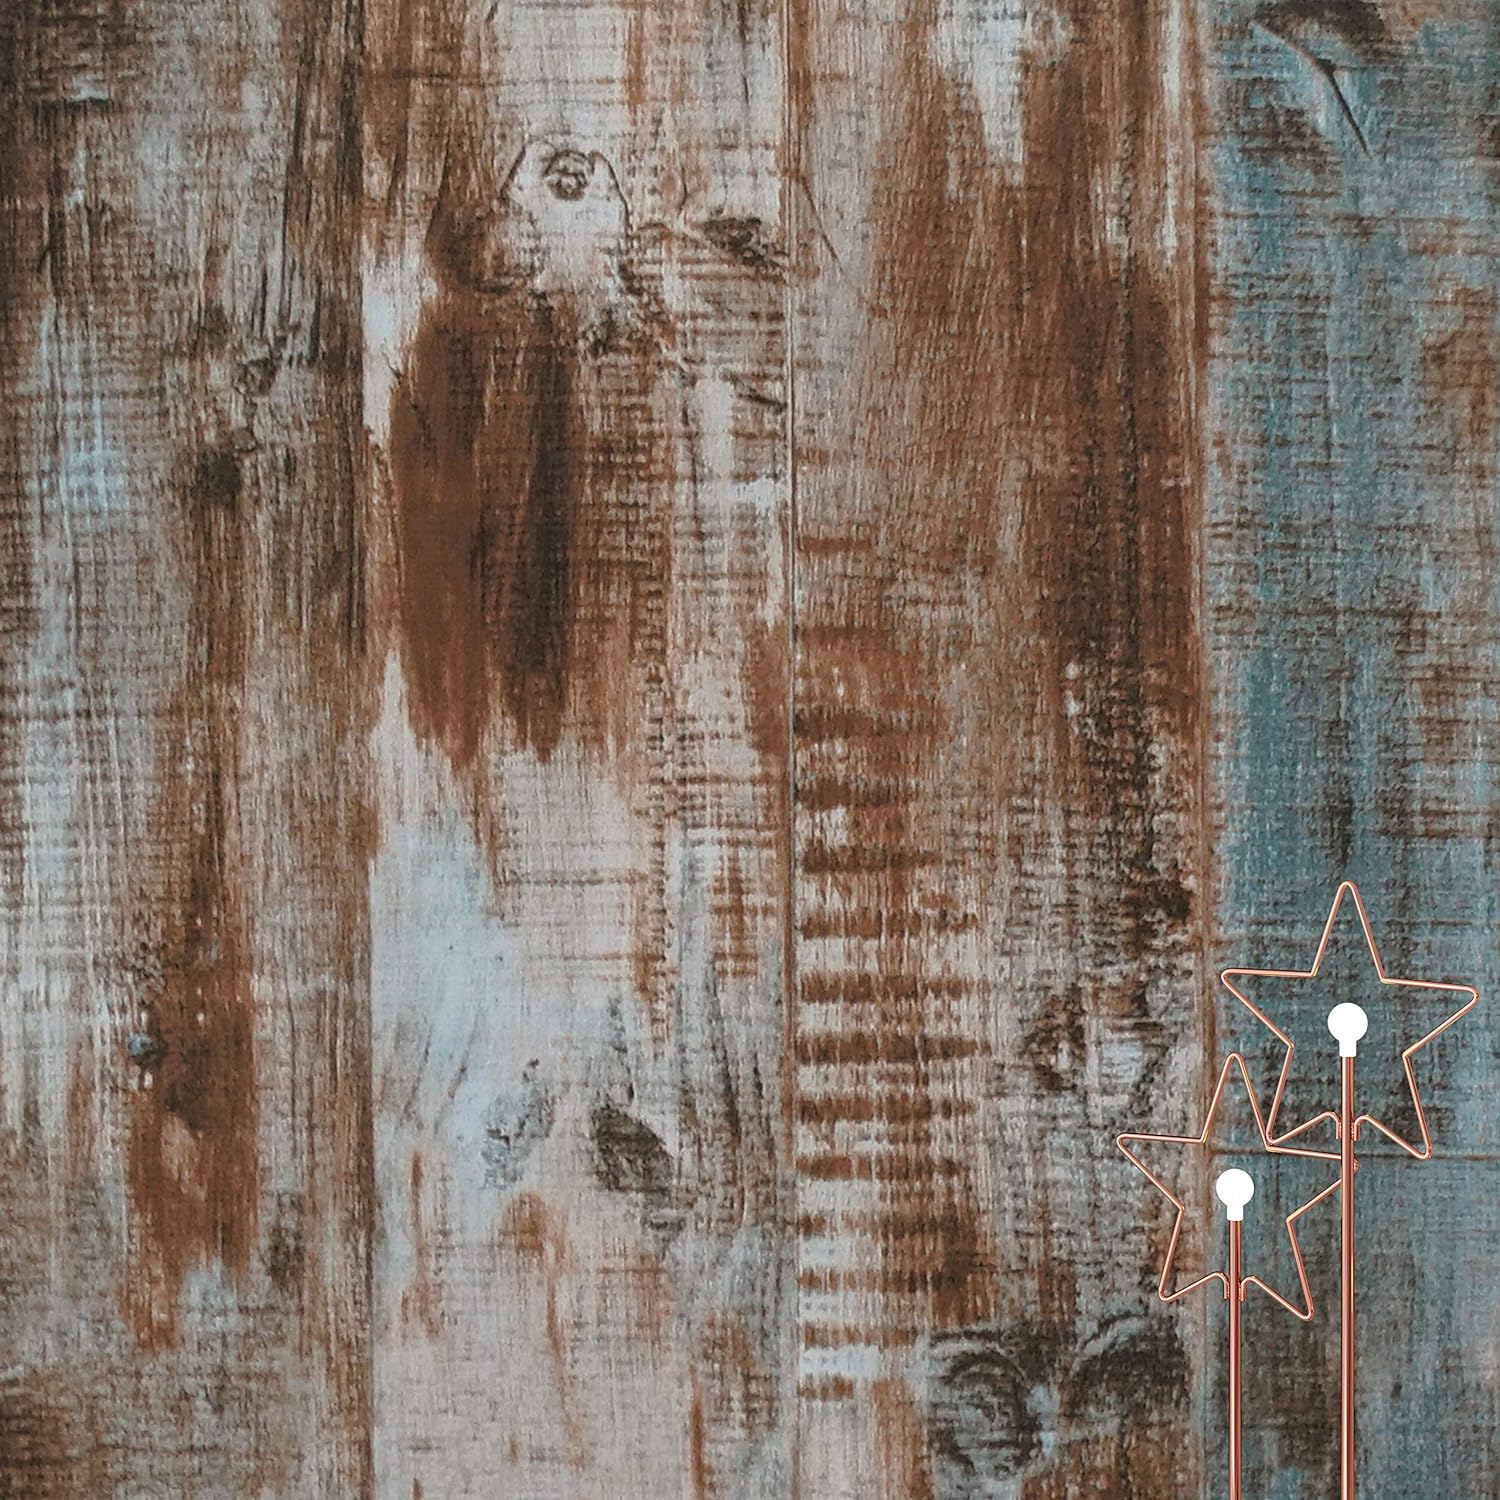 Dimoon 118''x17.7'' Wood Peel and Stick Wallpaper Thicken Blue Brown Wood Contact Paper Wood Wall Paper Removable Self Adhesive Faux Rustic Wood Contact Paper Grain Texture Vintage Reclaimed Vinyl